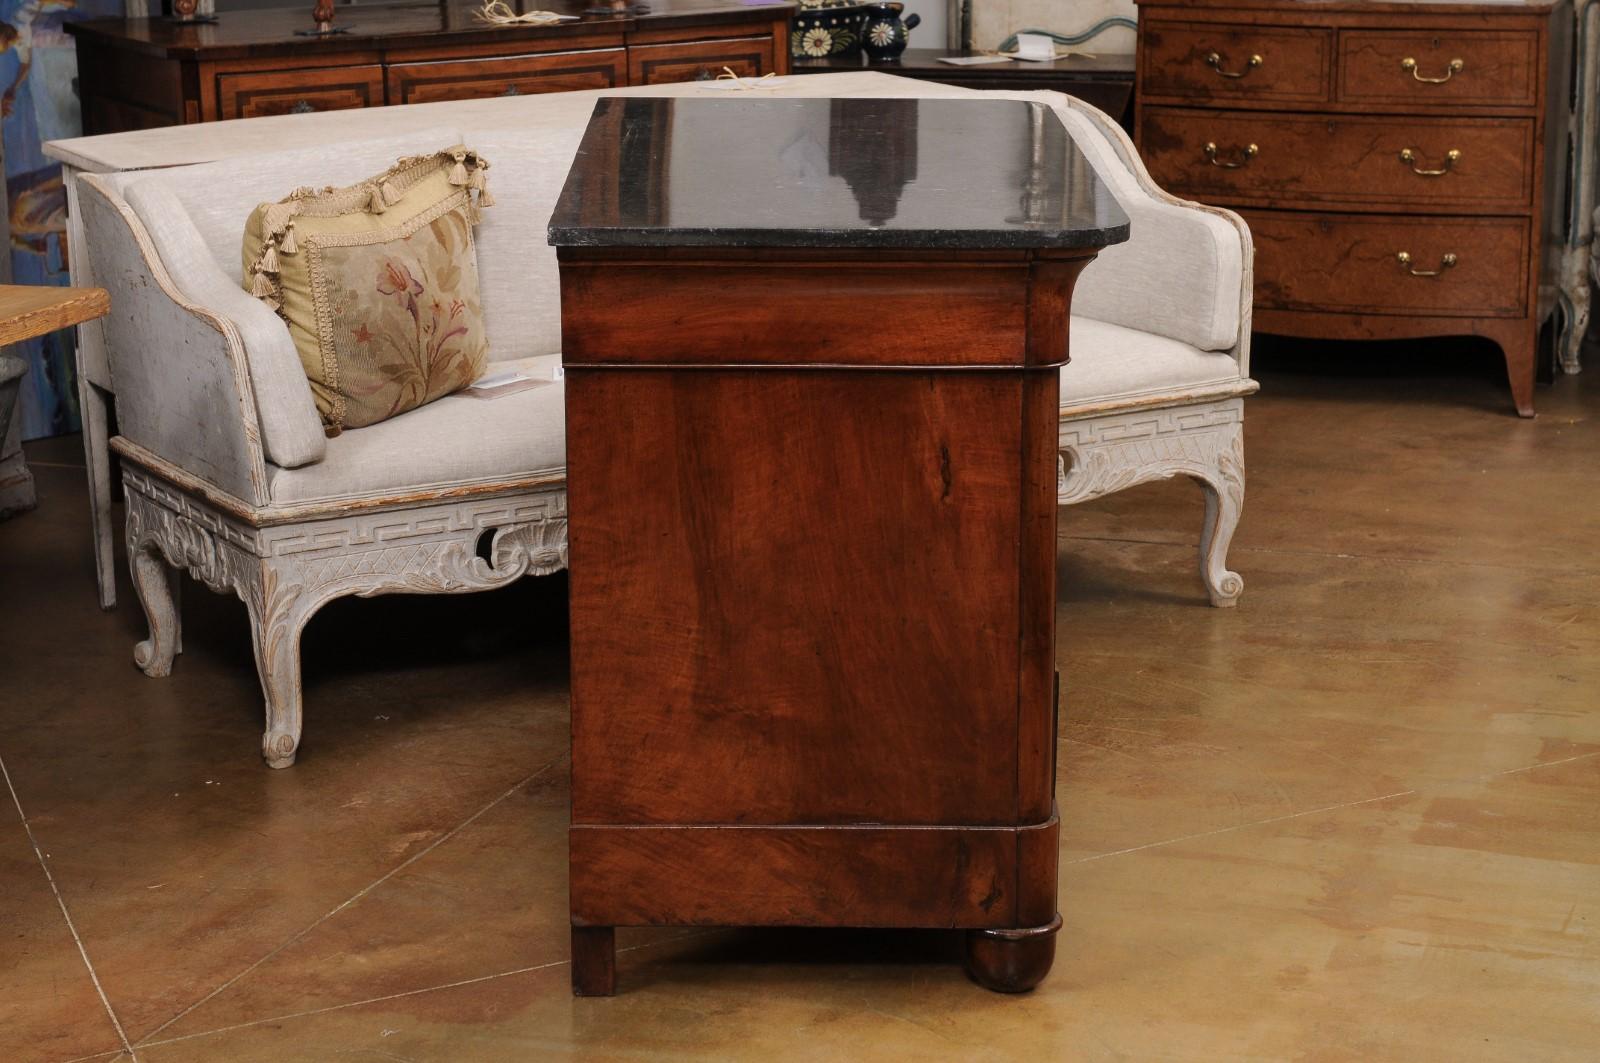 Italian Empire Style 1890s Marble Top Four-Drawer Commode with Bronze Hardware For Sale 2